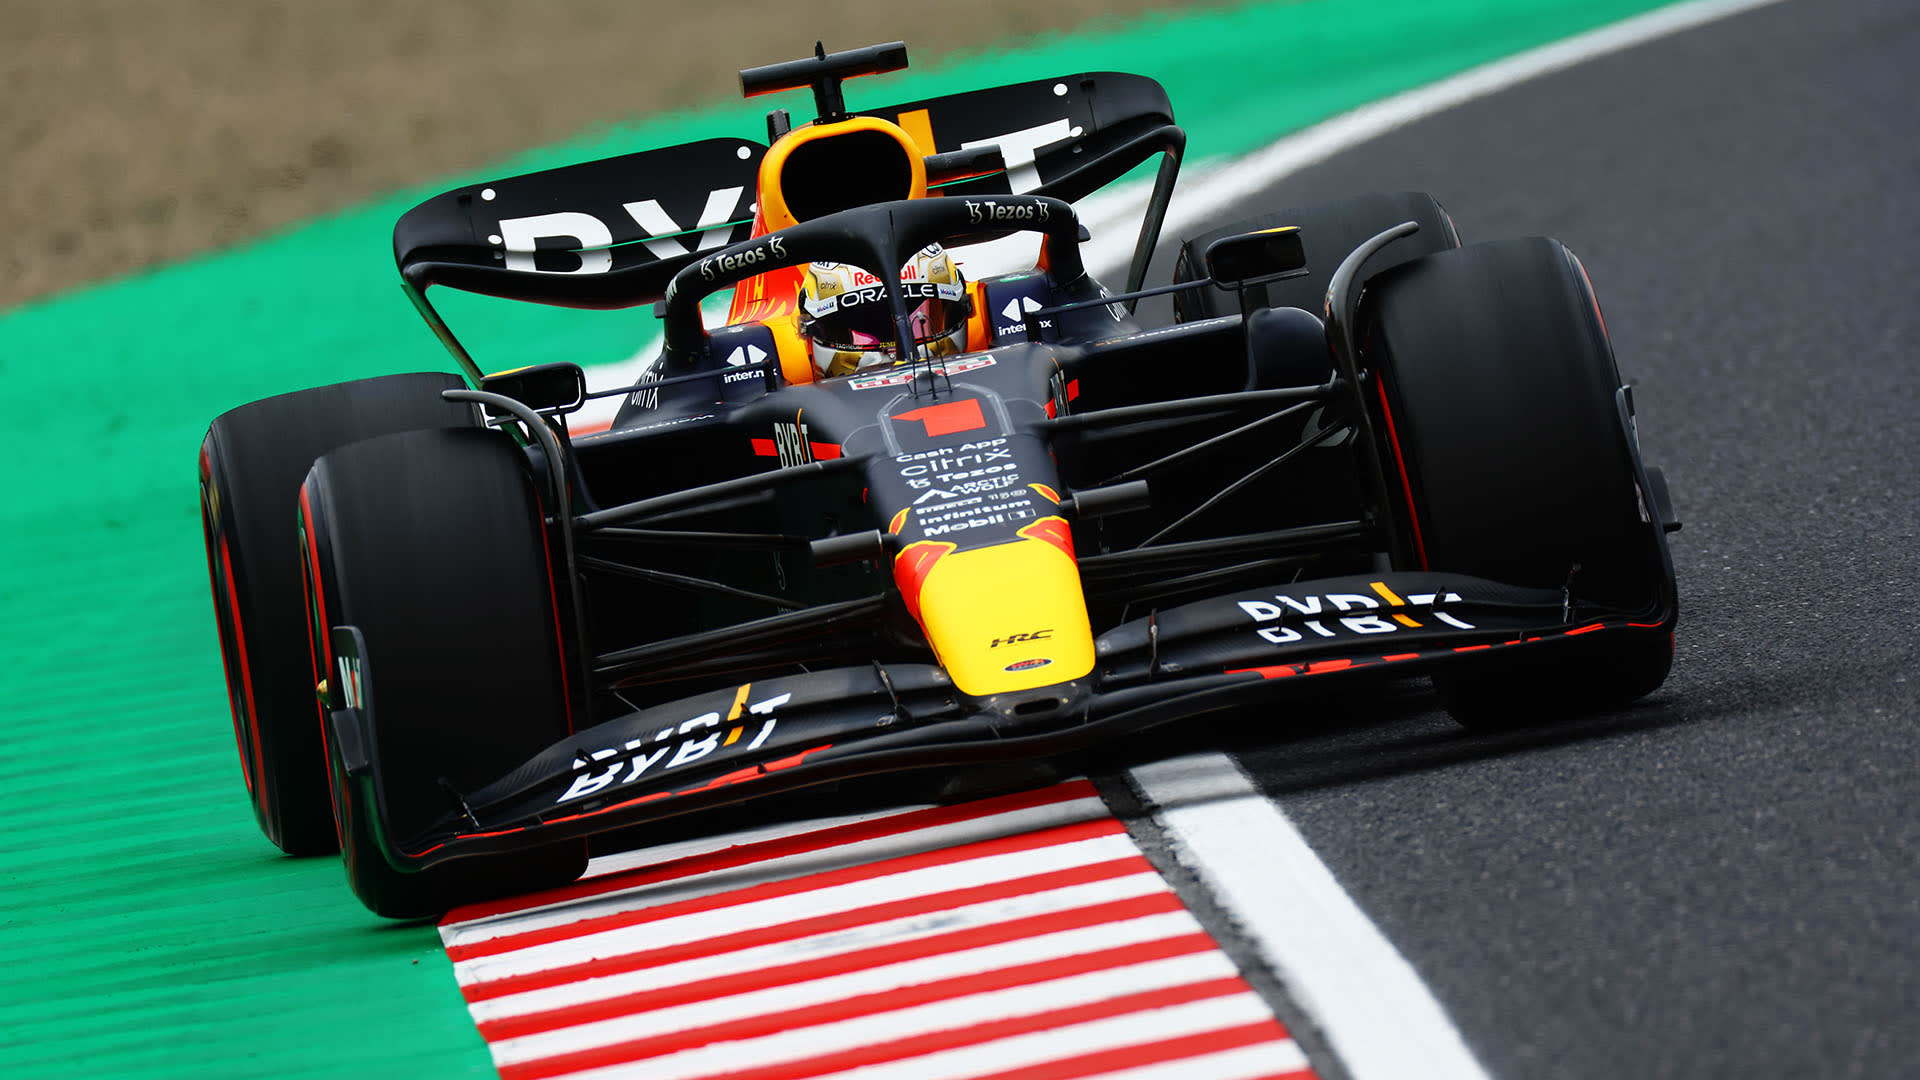 2022 Japanese Grand Prix FP3 report and highlights Verstappen leads the way from Sainz and Leclerc in dry final practice at Suzuka Formula 1®